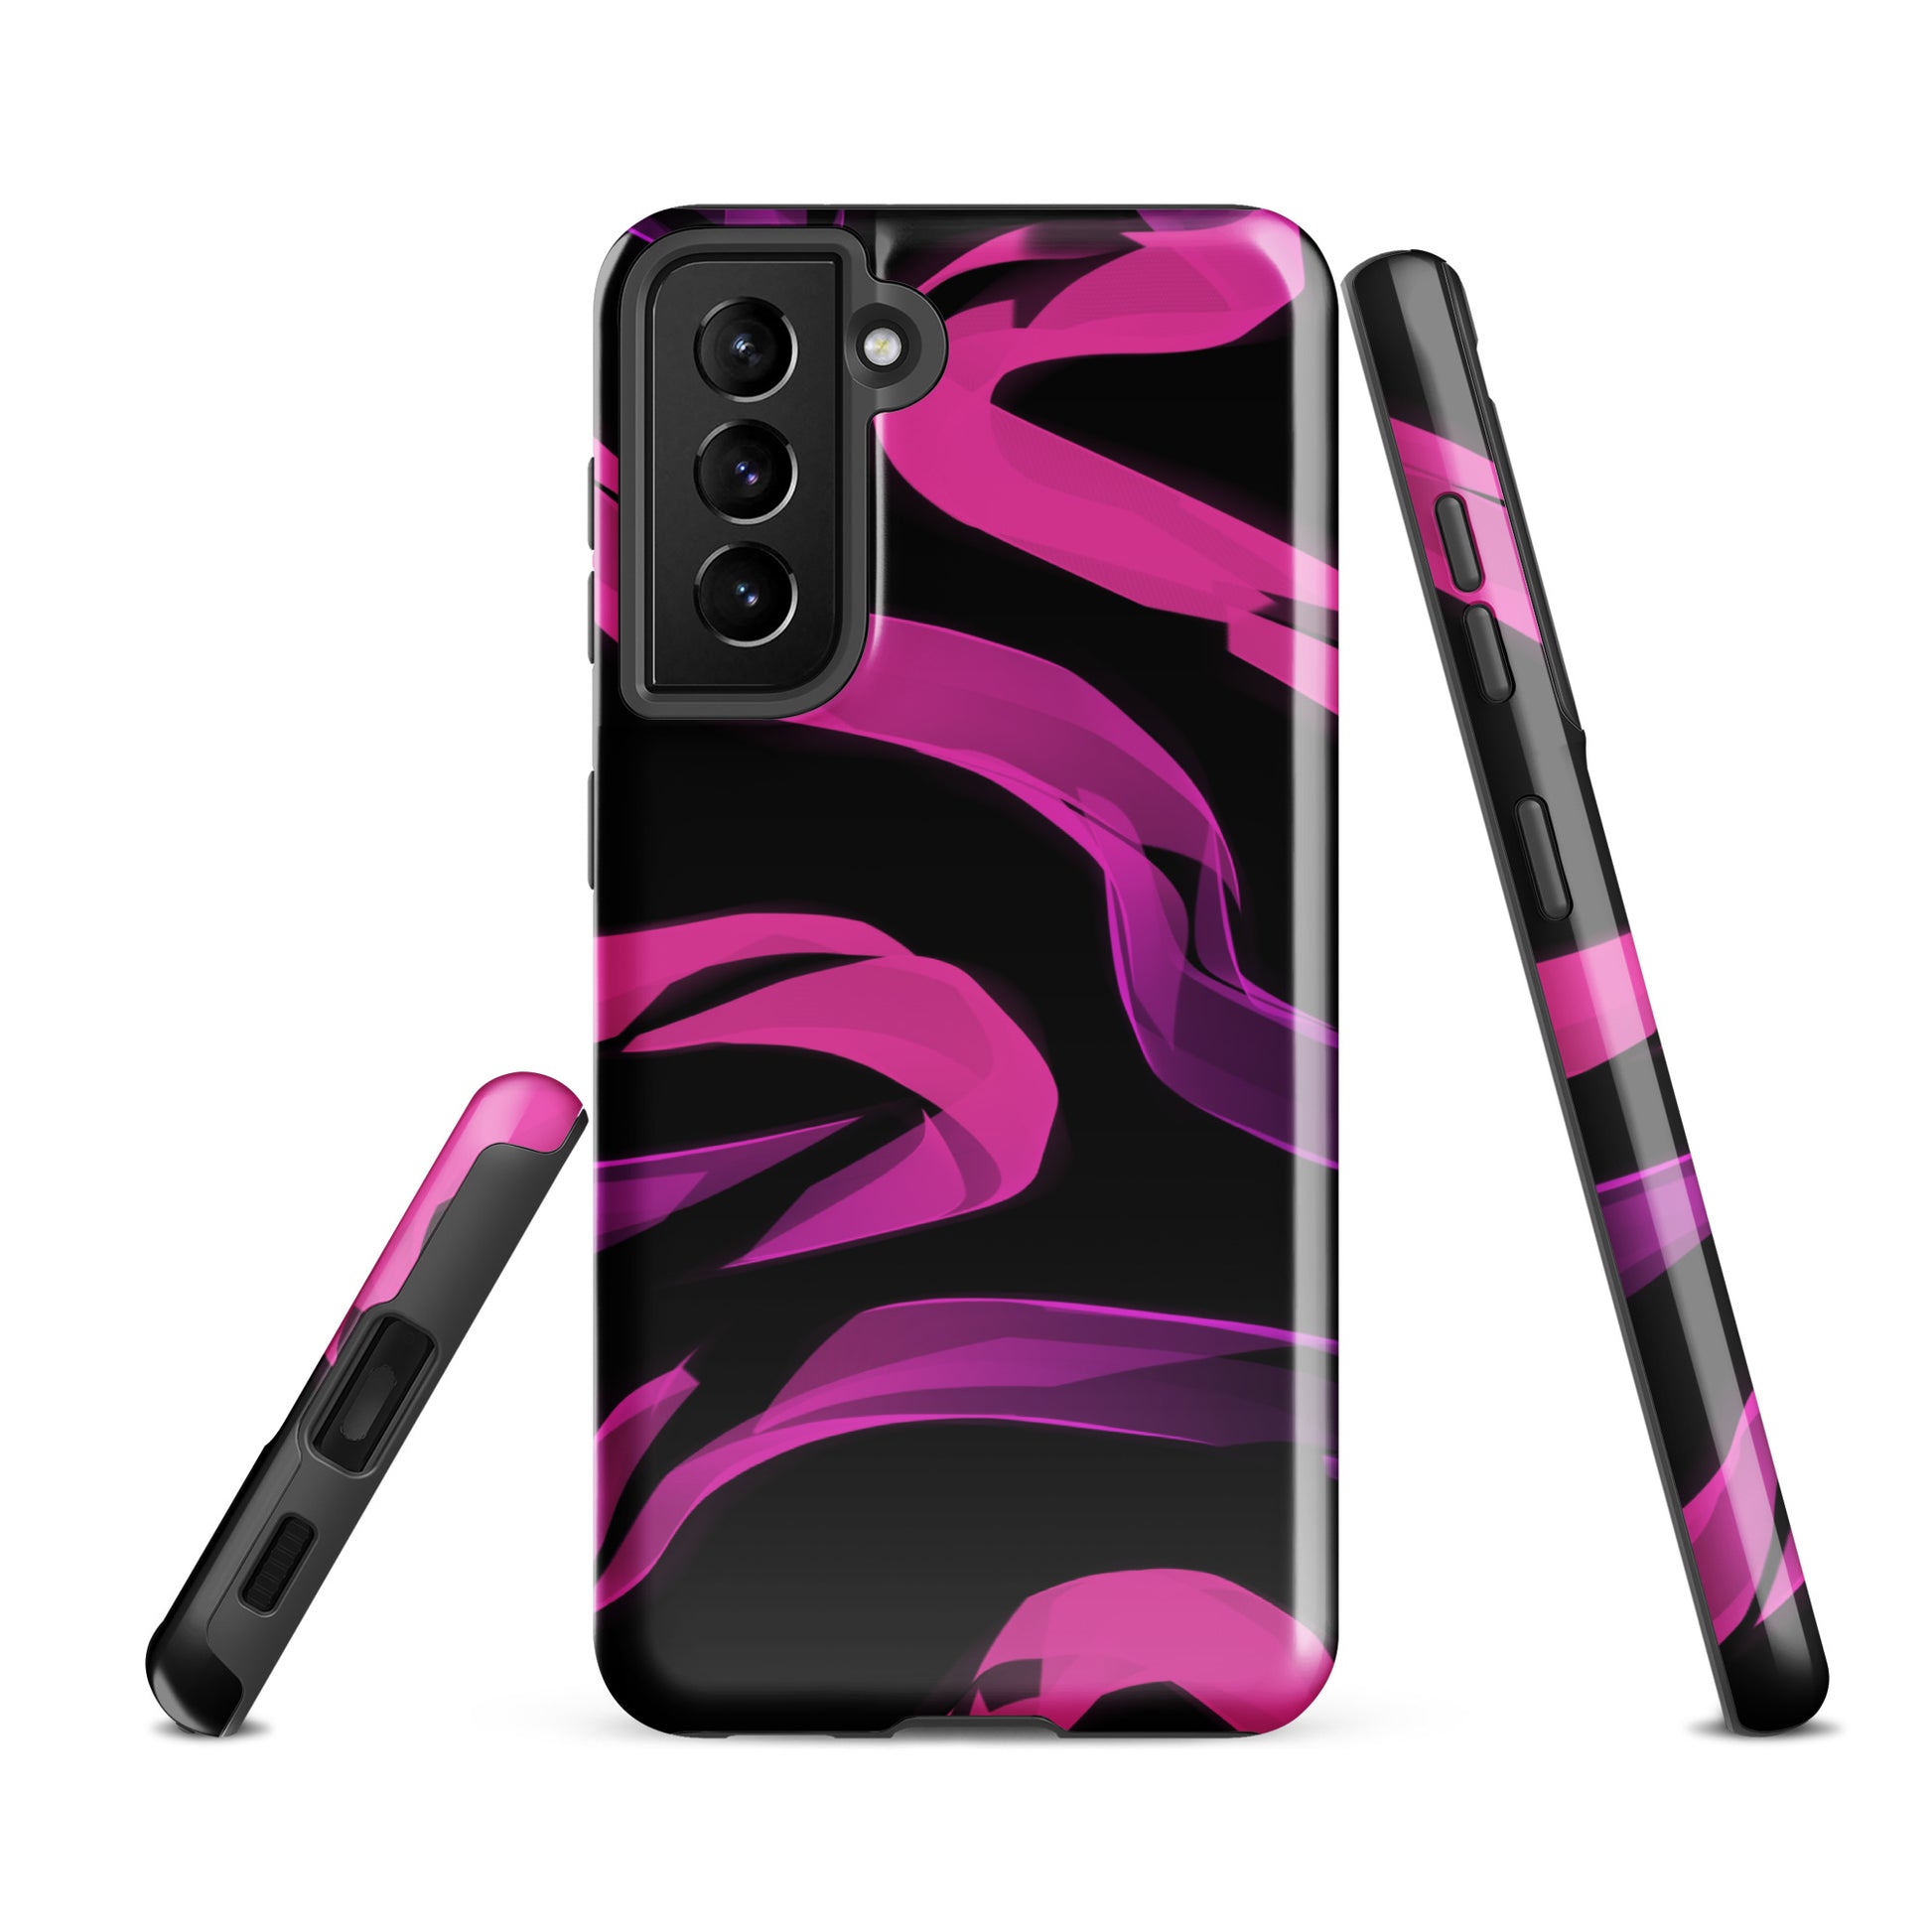 A Bright Pink Neon Sketch Case for the Samsung Galaxy S21 FE